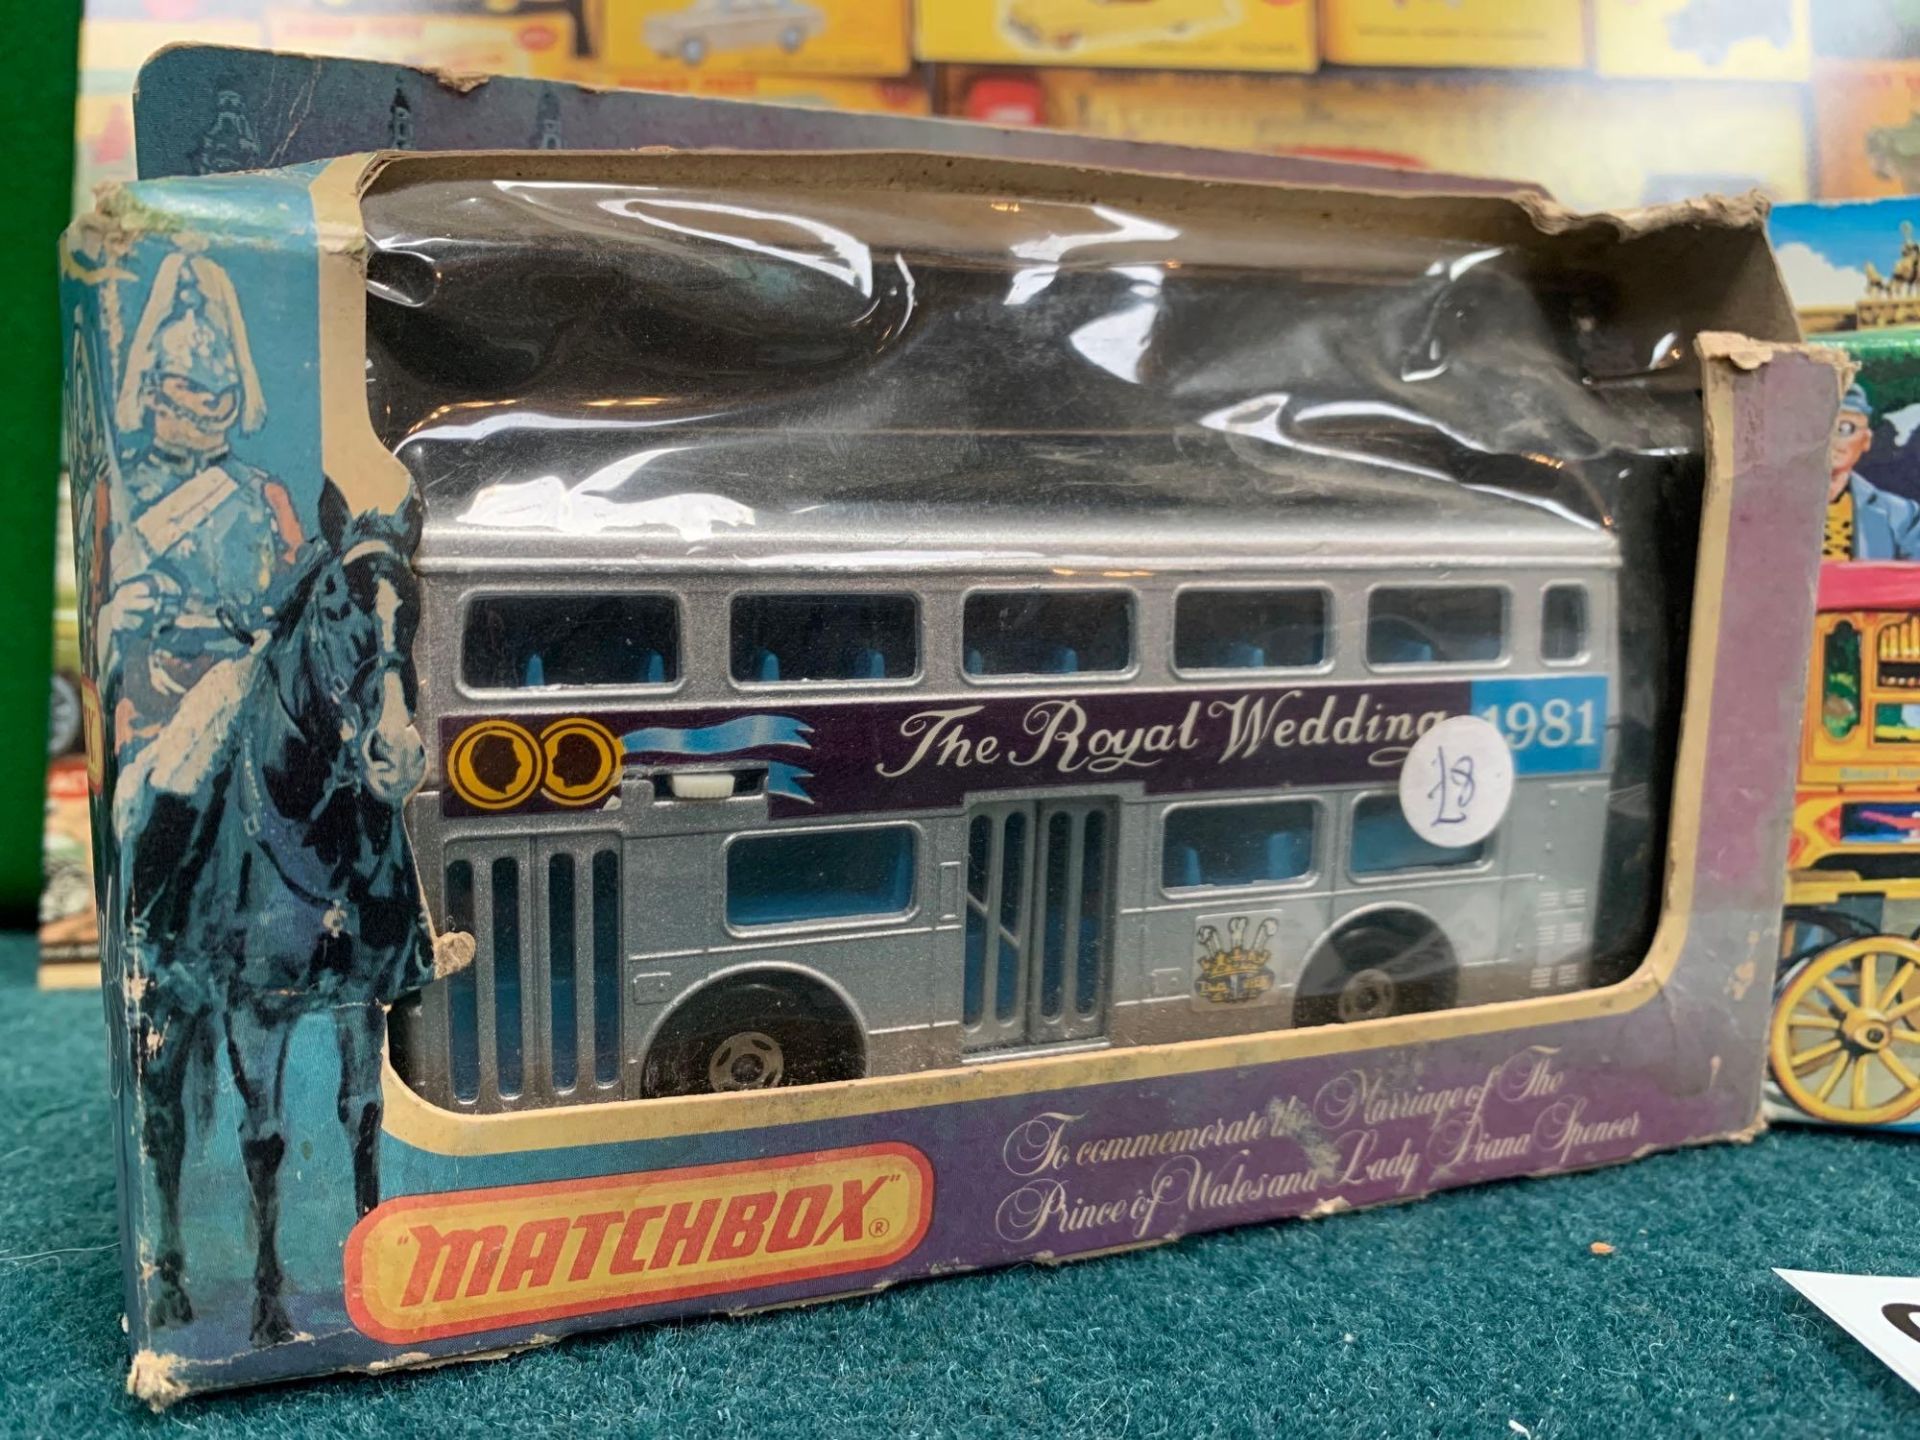 2 X Matchbox Buses The Royal Wedding 1981 To Commemorate The Marriage Of The Prince Of Wales And - Image 4 of 6